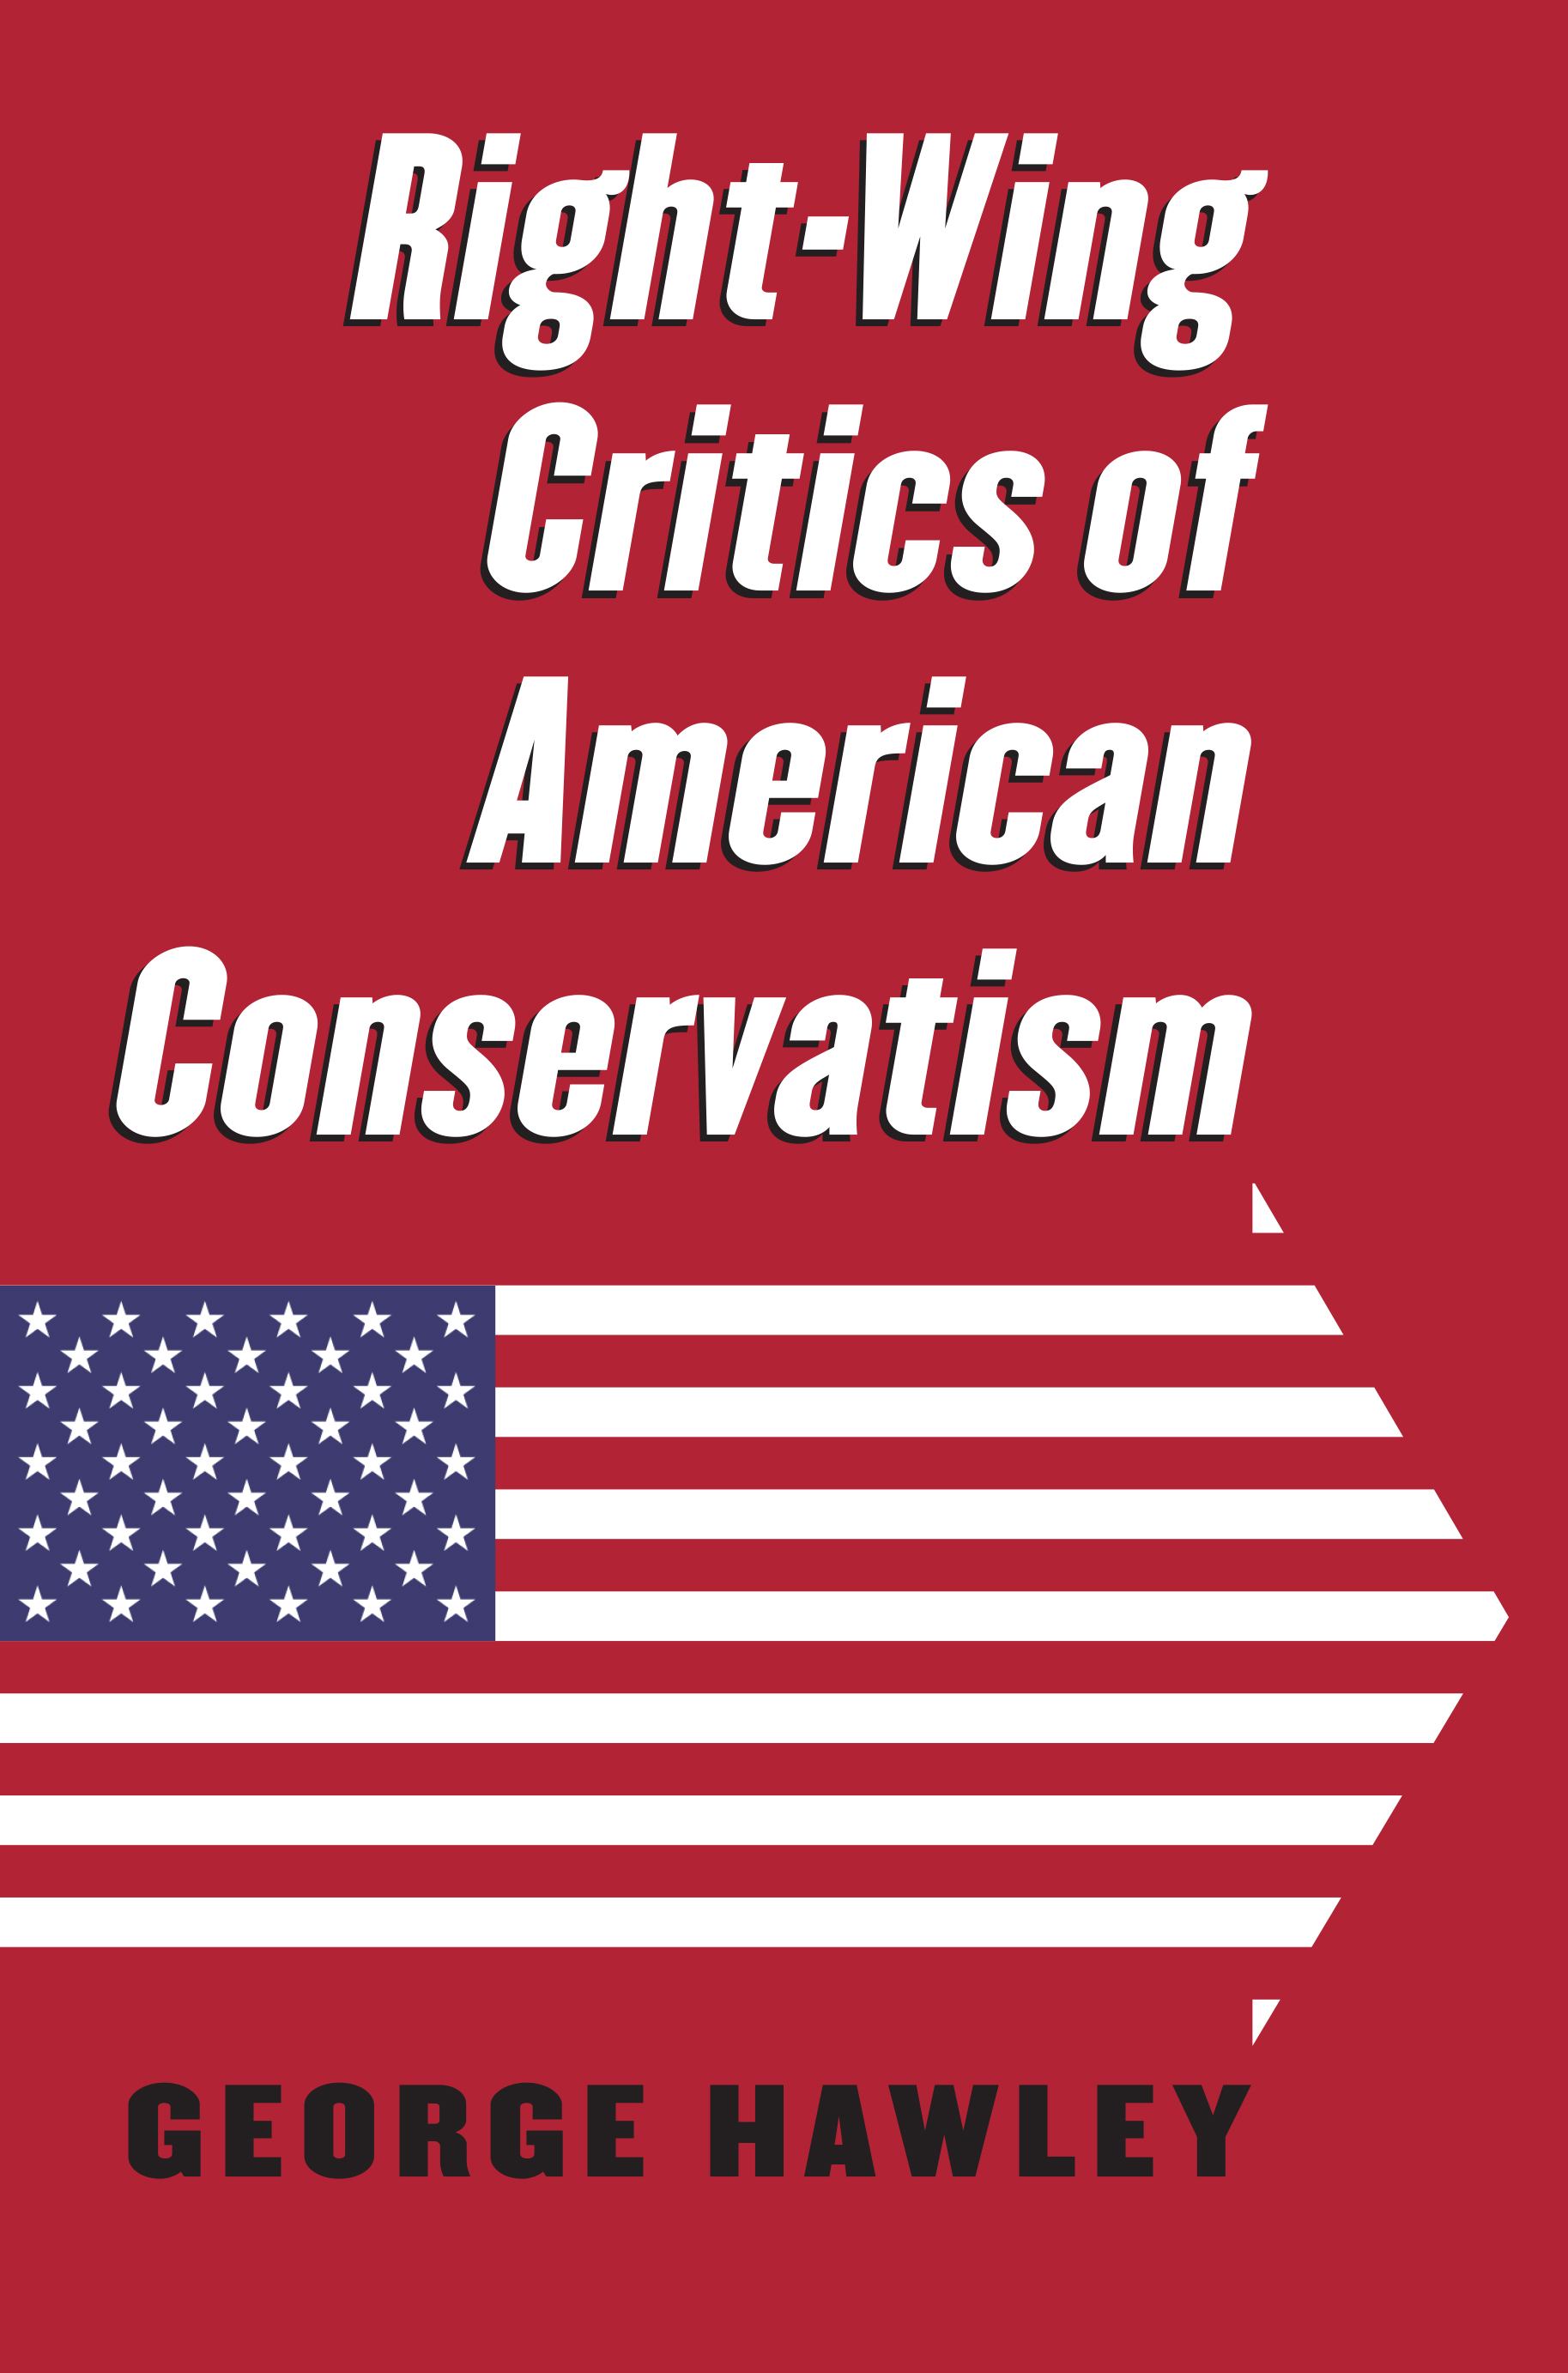 cover for Right-Wing Critics of American Conservatism by George Hawley